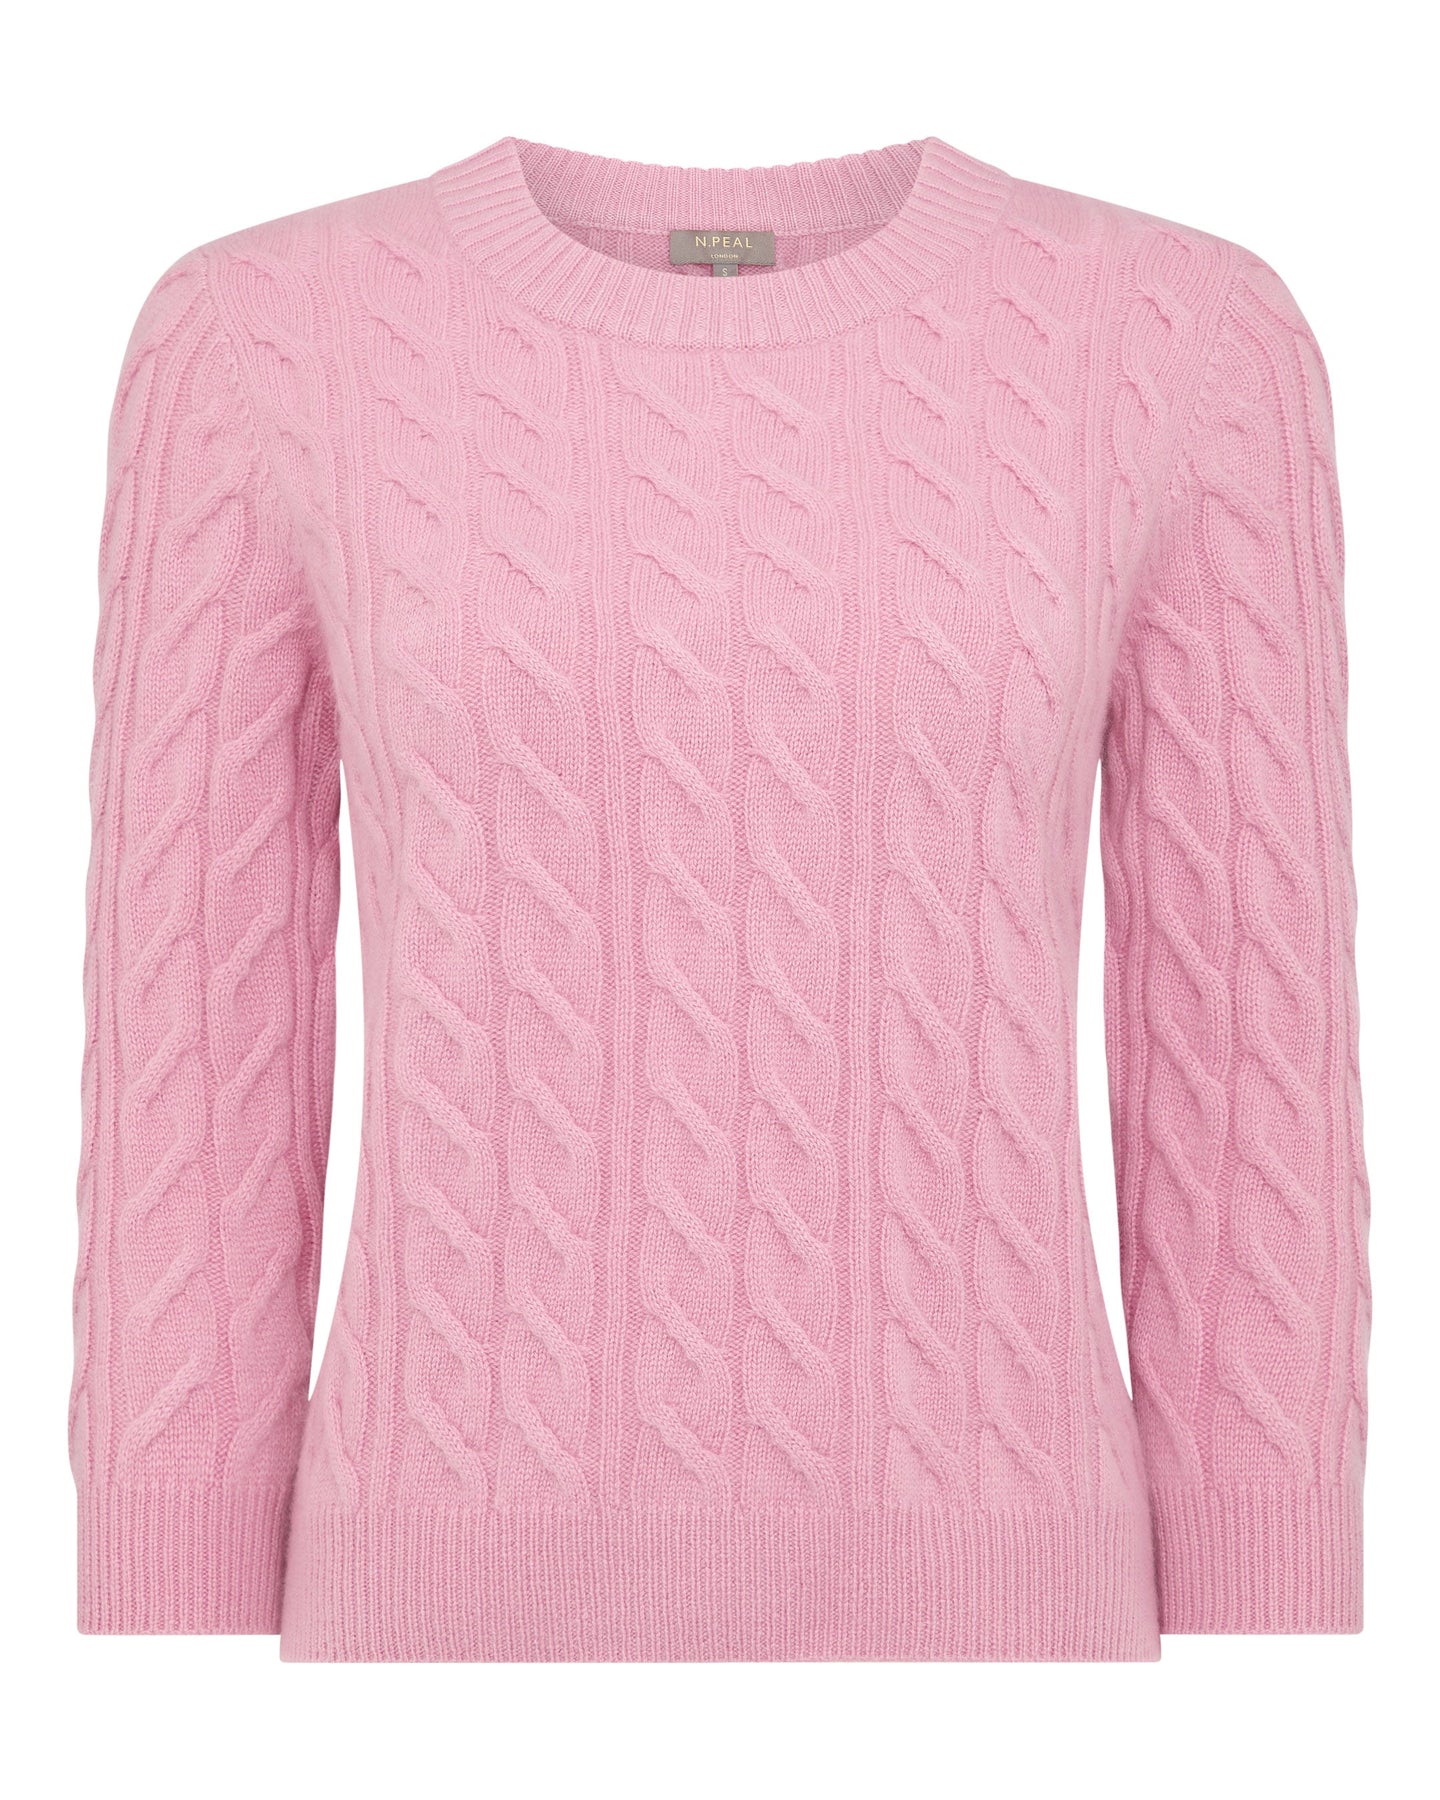 N.Peal Women's Round Neck Cable Cashmere Jumper Burano Pink